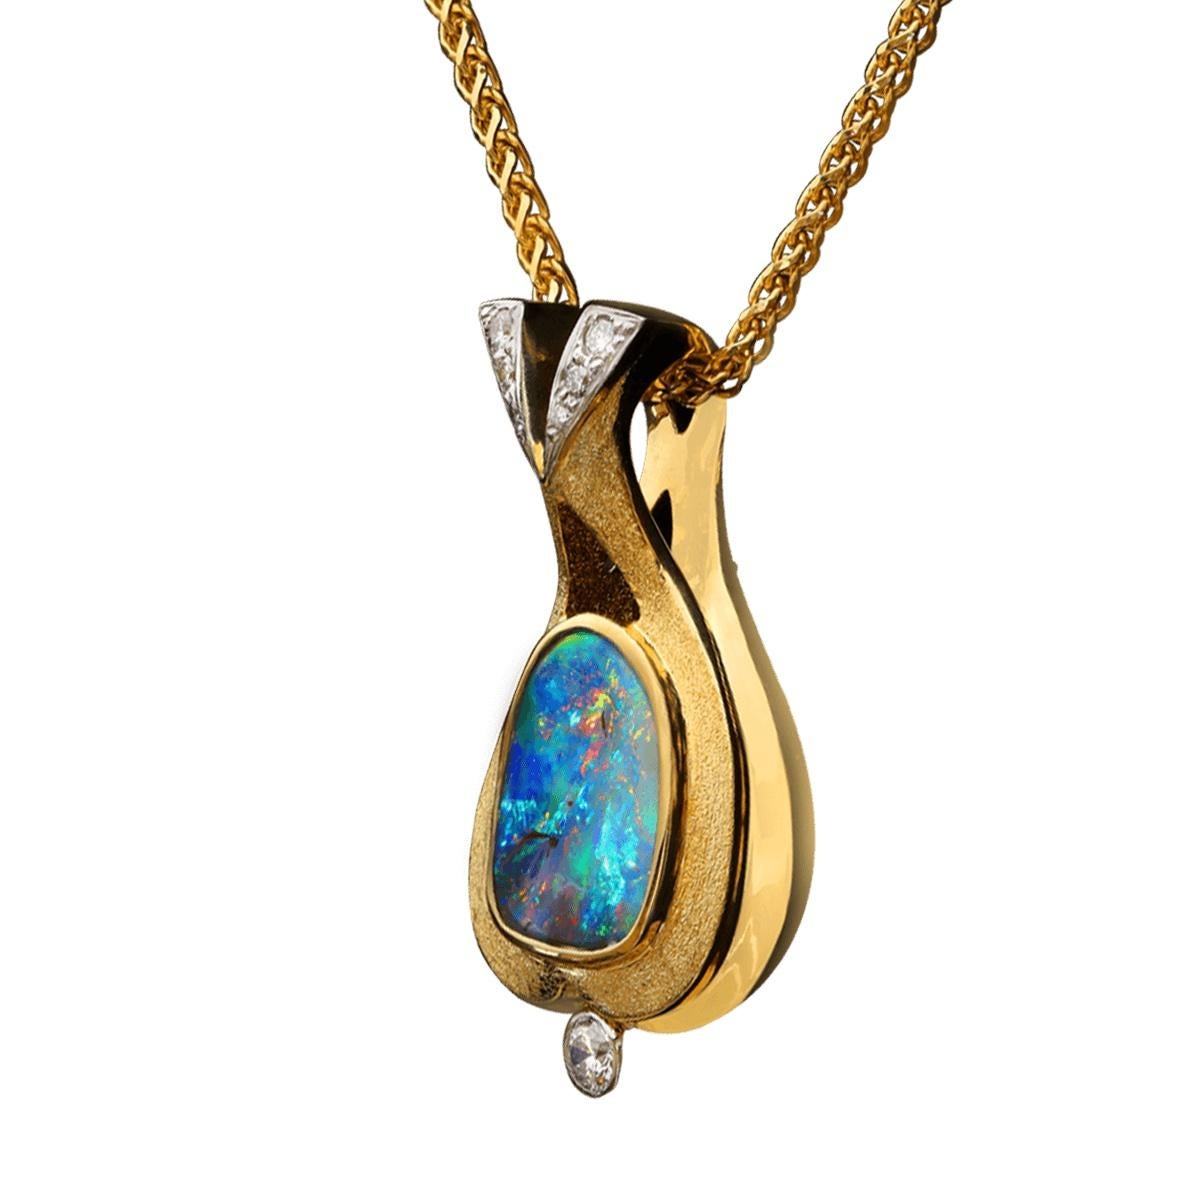 For the lovers of blue-green opals, this gorgeous pendant will surely please. A very bright blue-green Boulder Opal with flicks of orange and gold and hints of purple this stone is truly a gem. Surrounded in 18K solid gold and 7 high jewellery grade